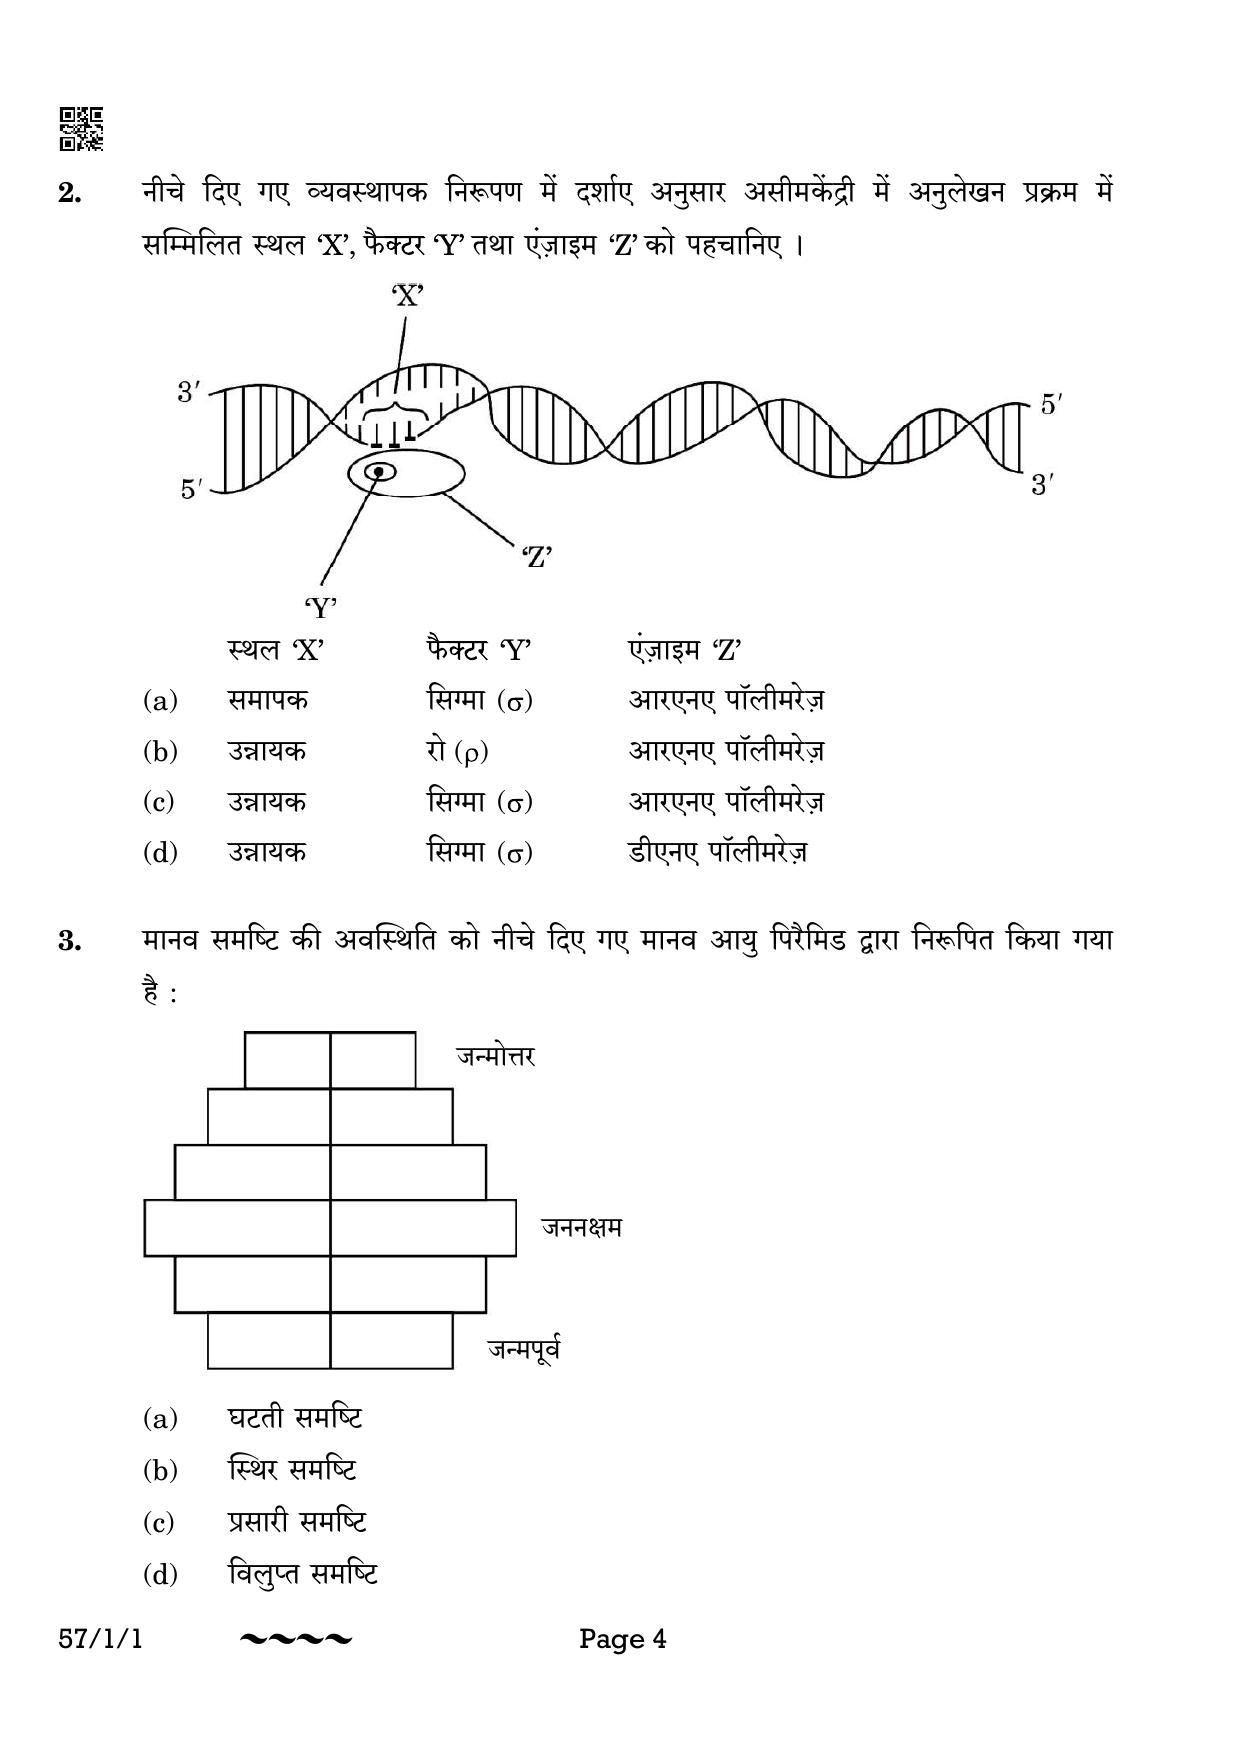 CBSE Class 12 57-1-1 Biology 2023 Question Paper - Page 4